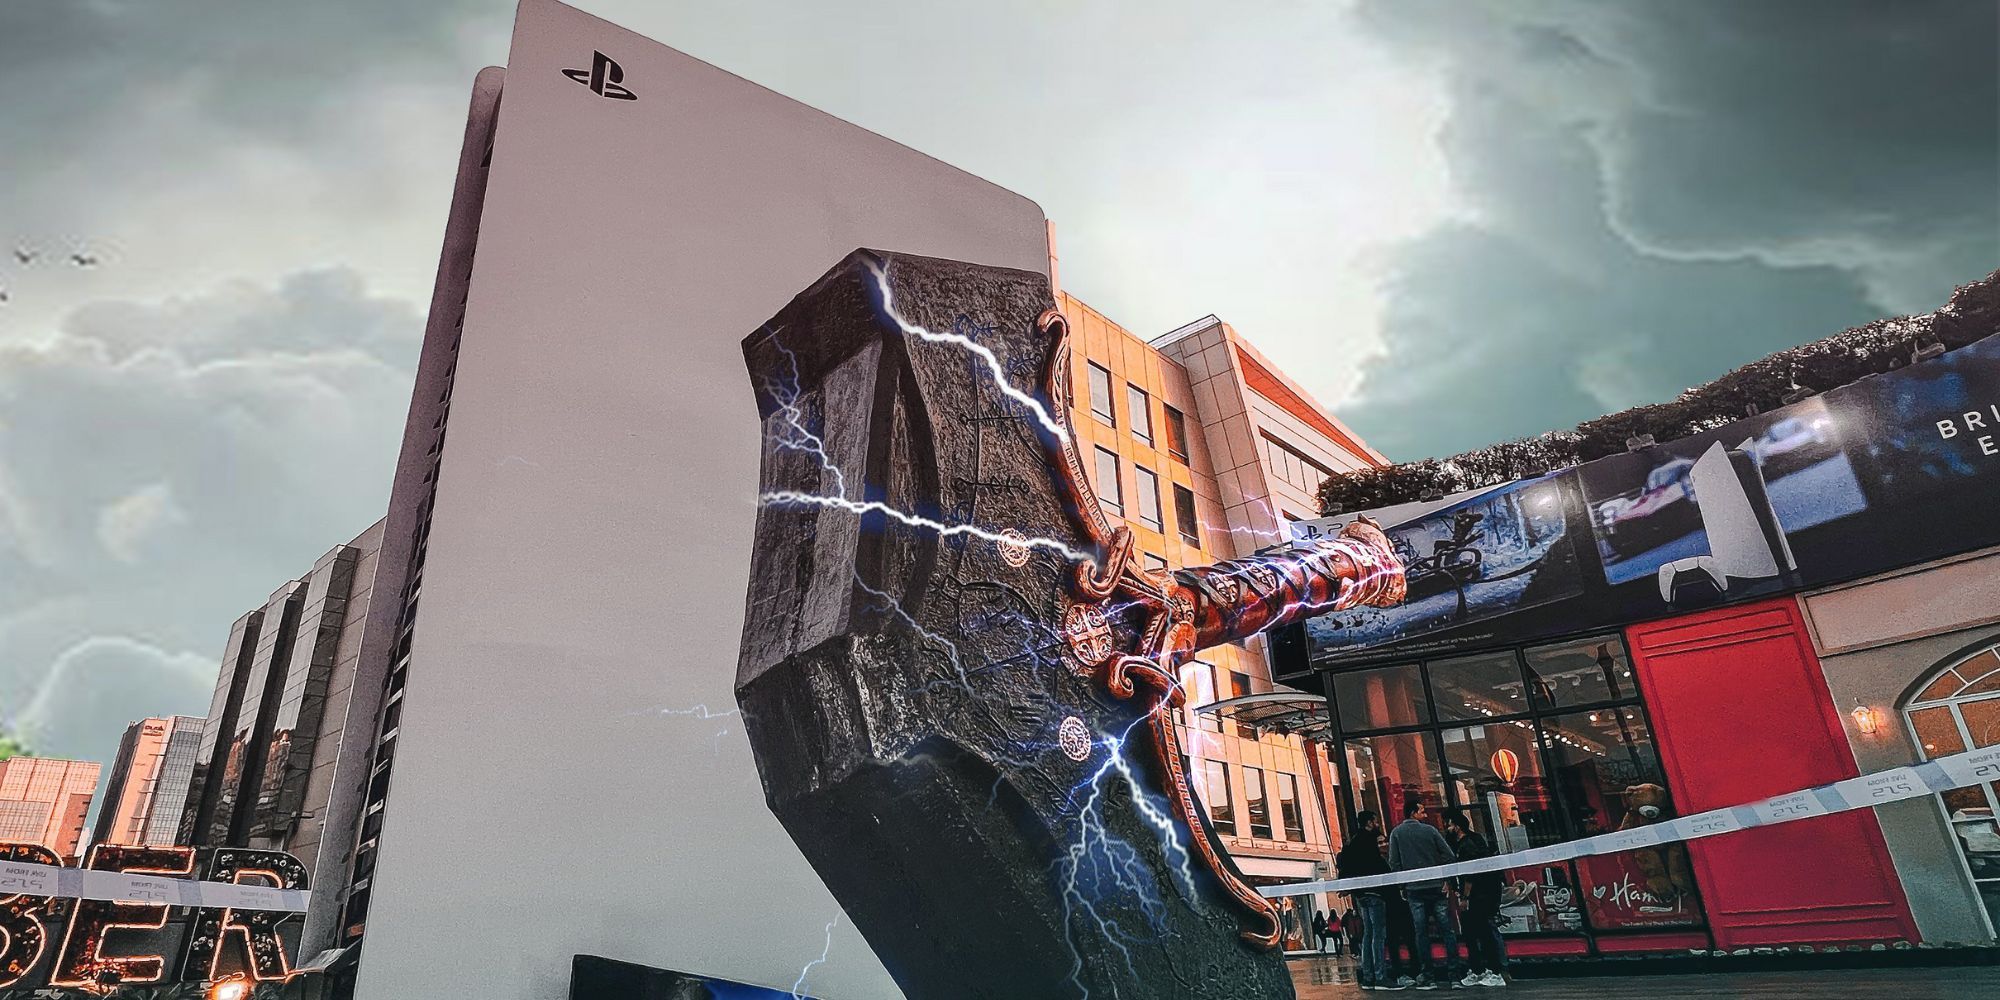 PlayStation India's photo of a giant Mjolnir.